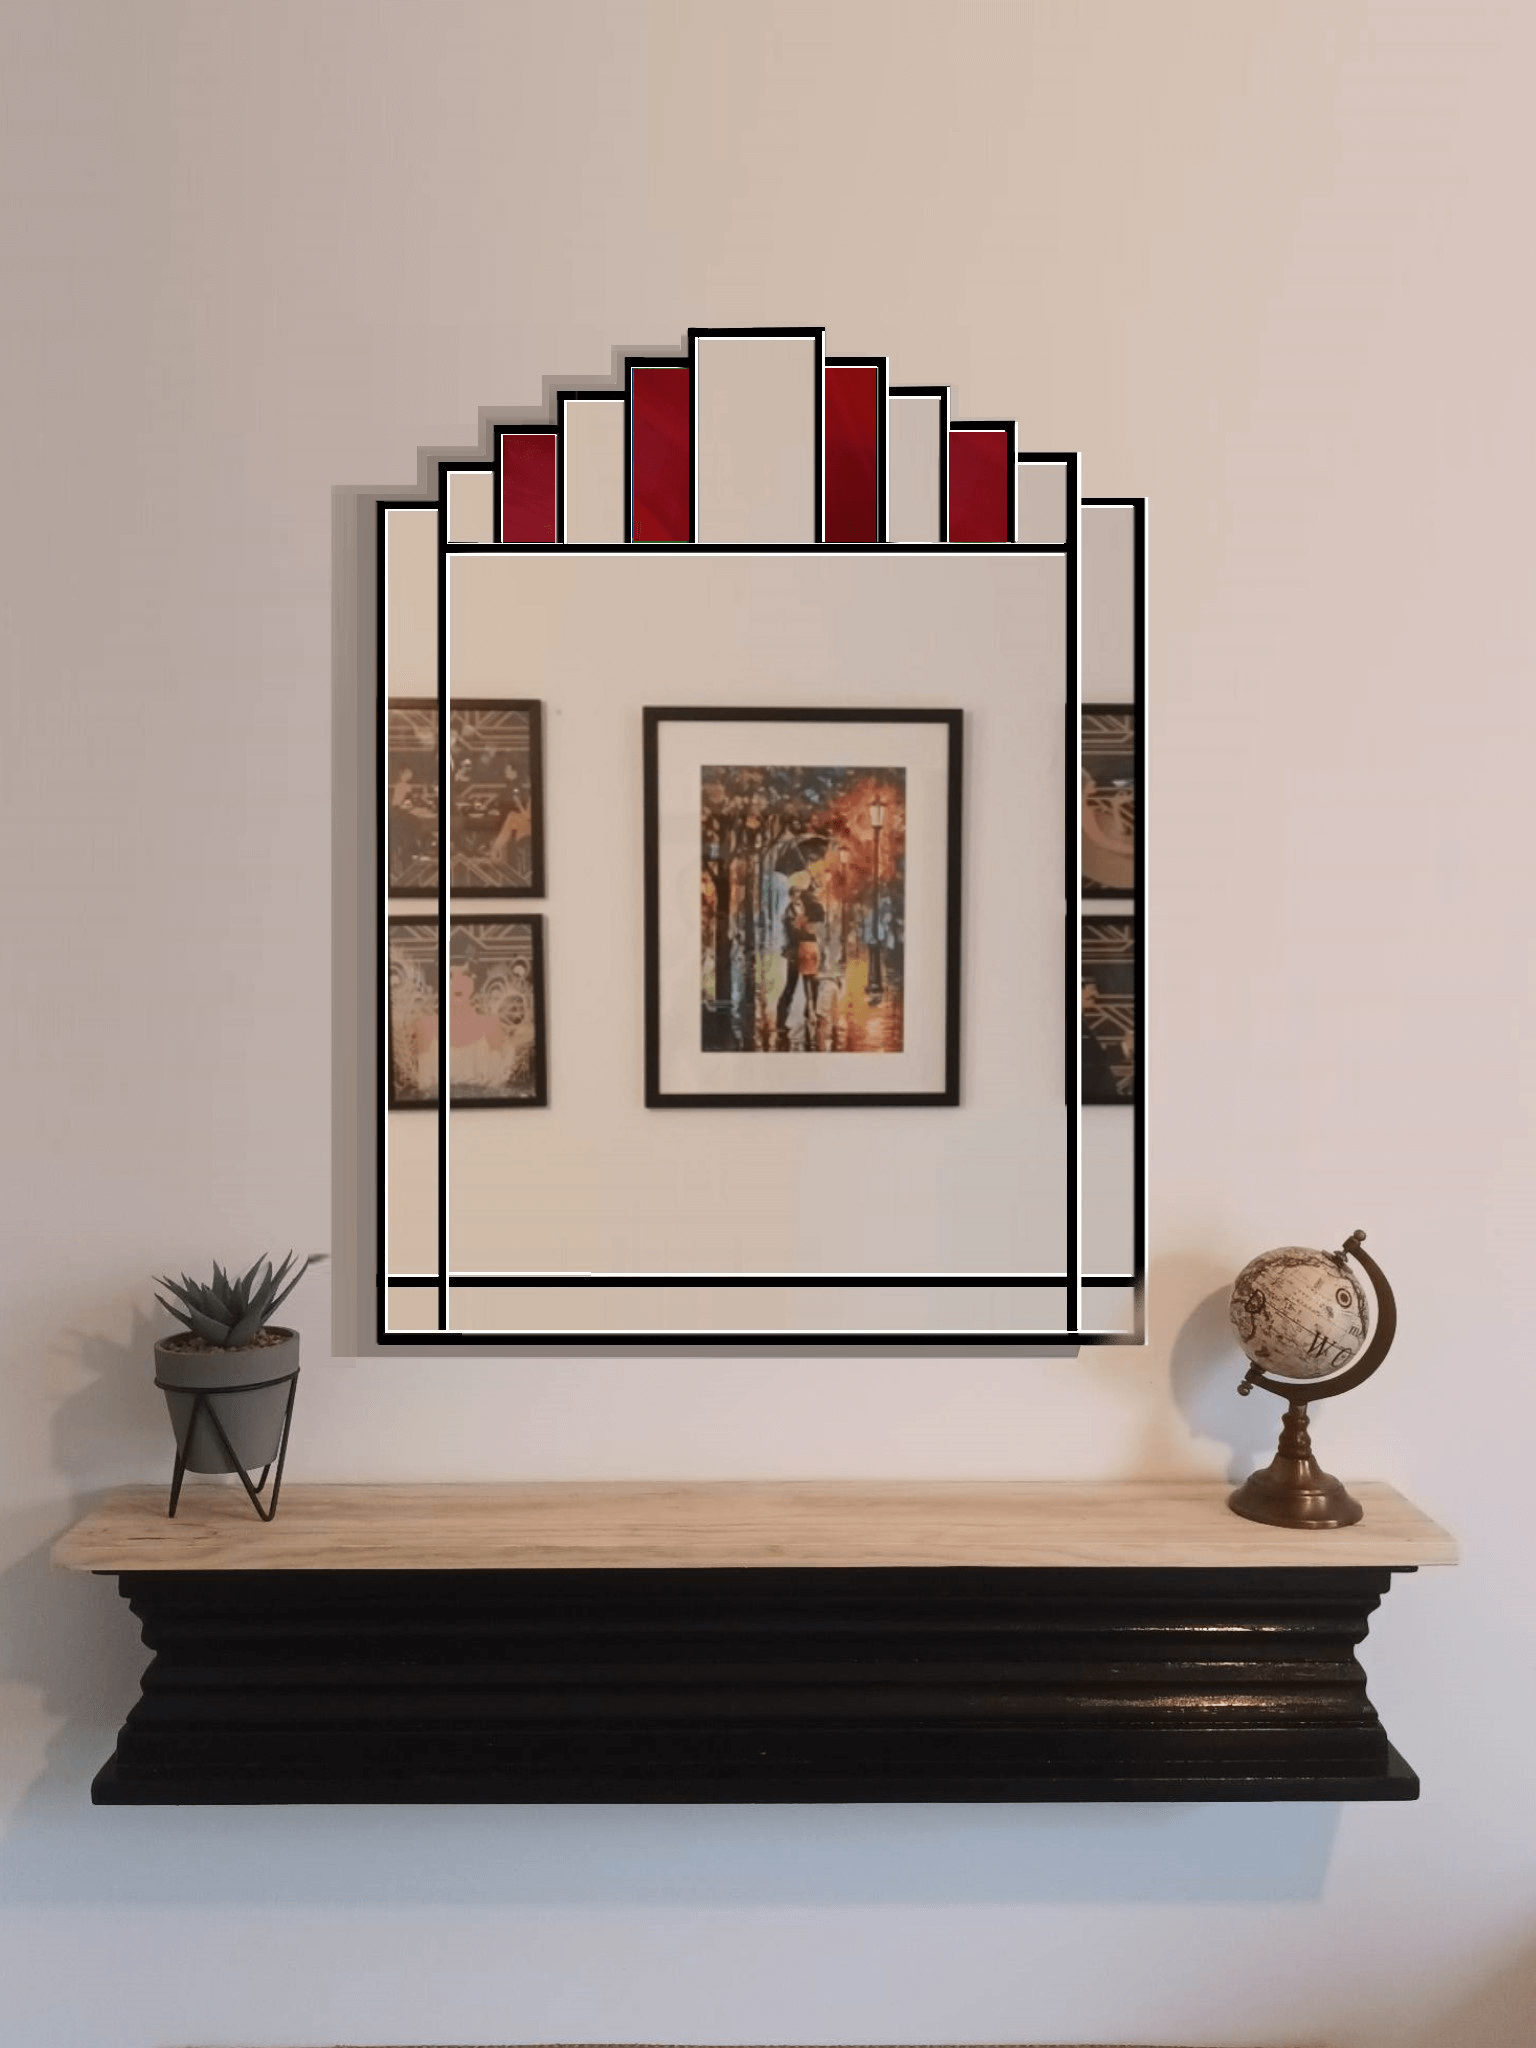 Large Art Deco 1930's Style Wall Mirror with red stain glass